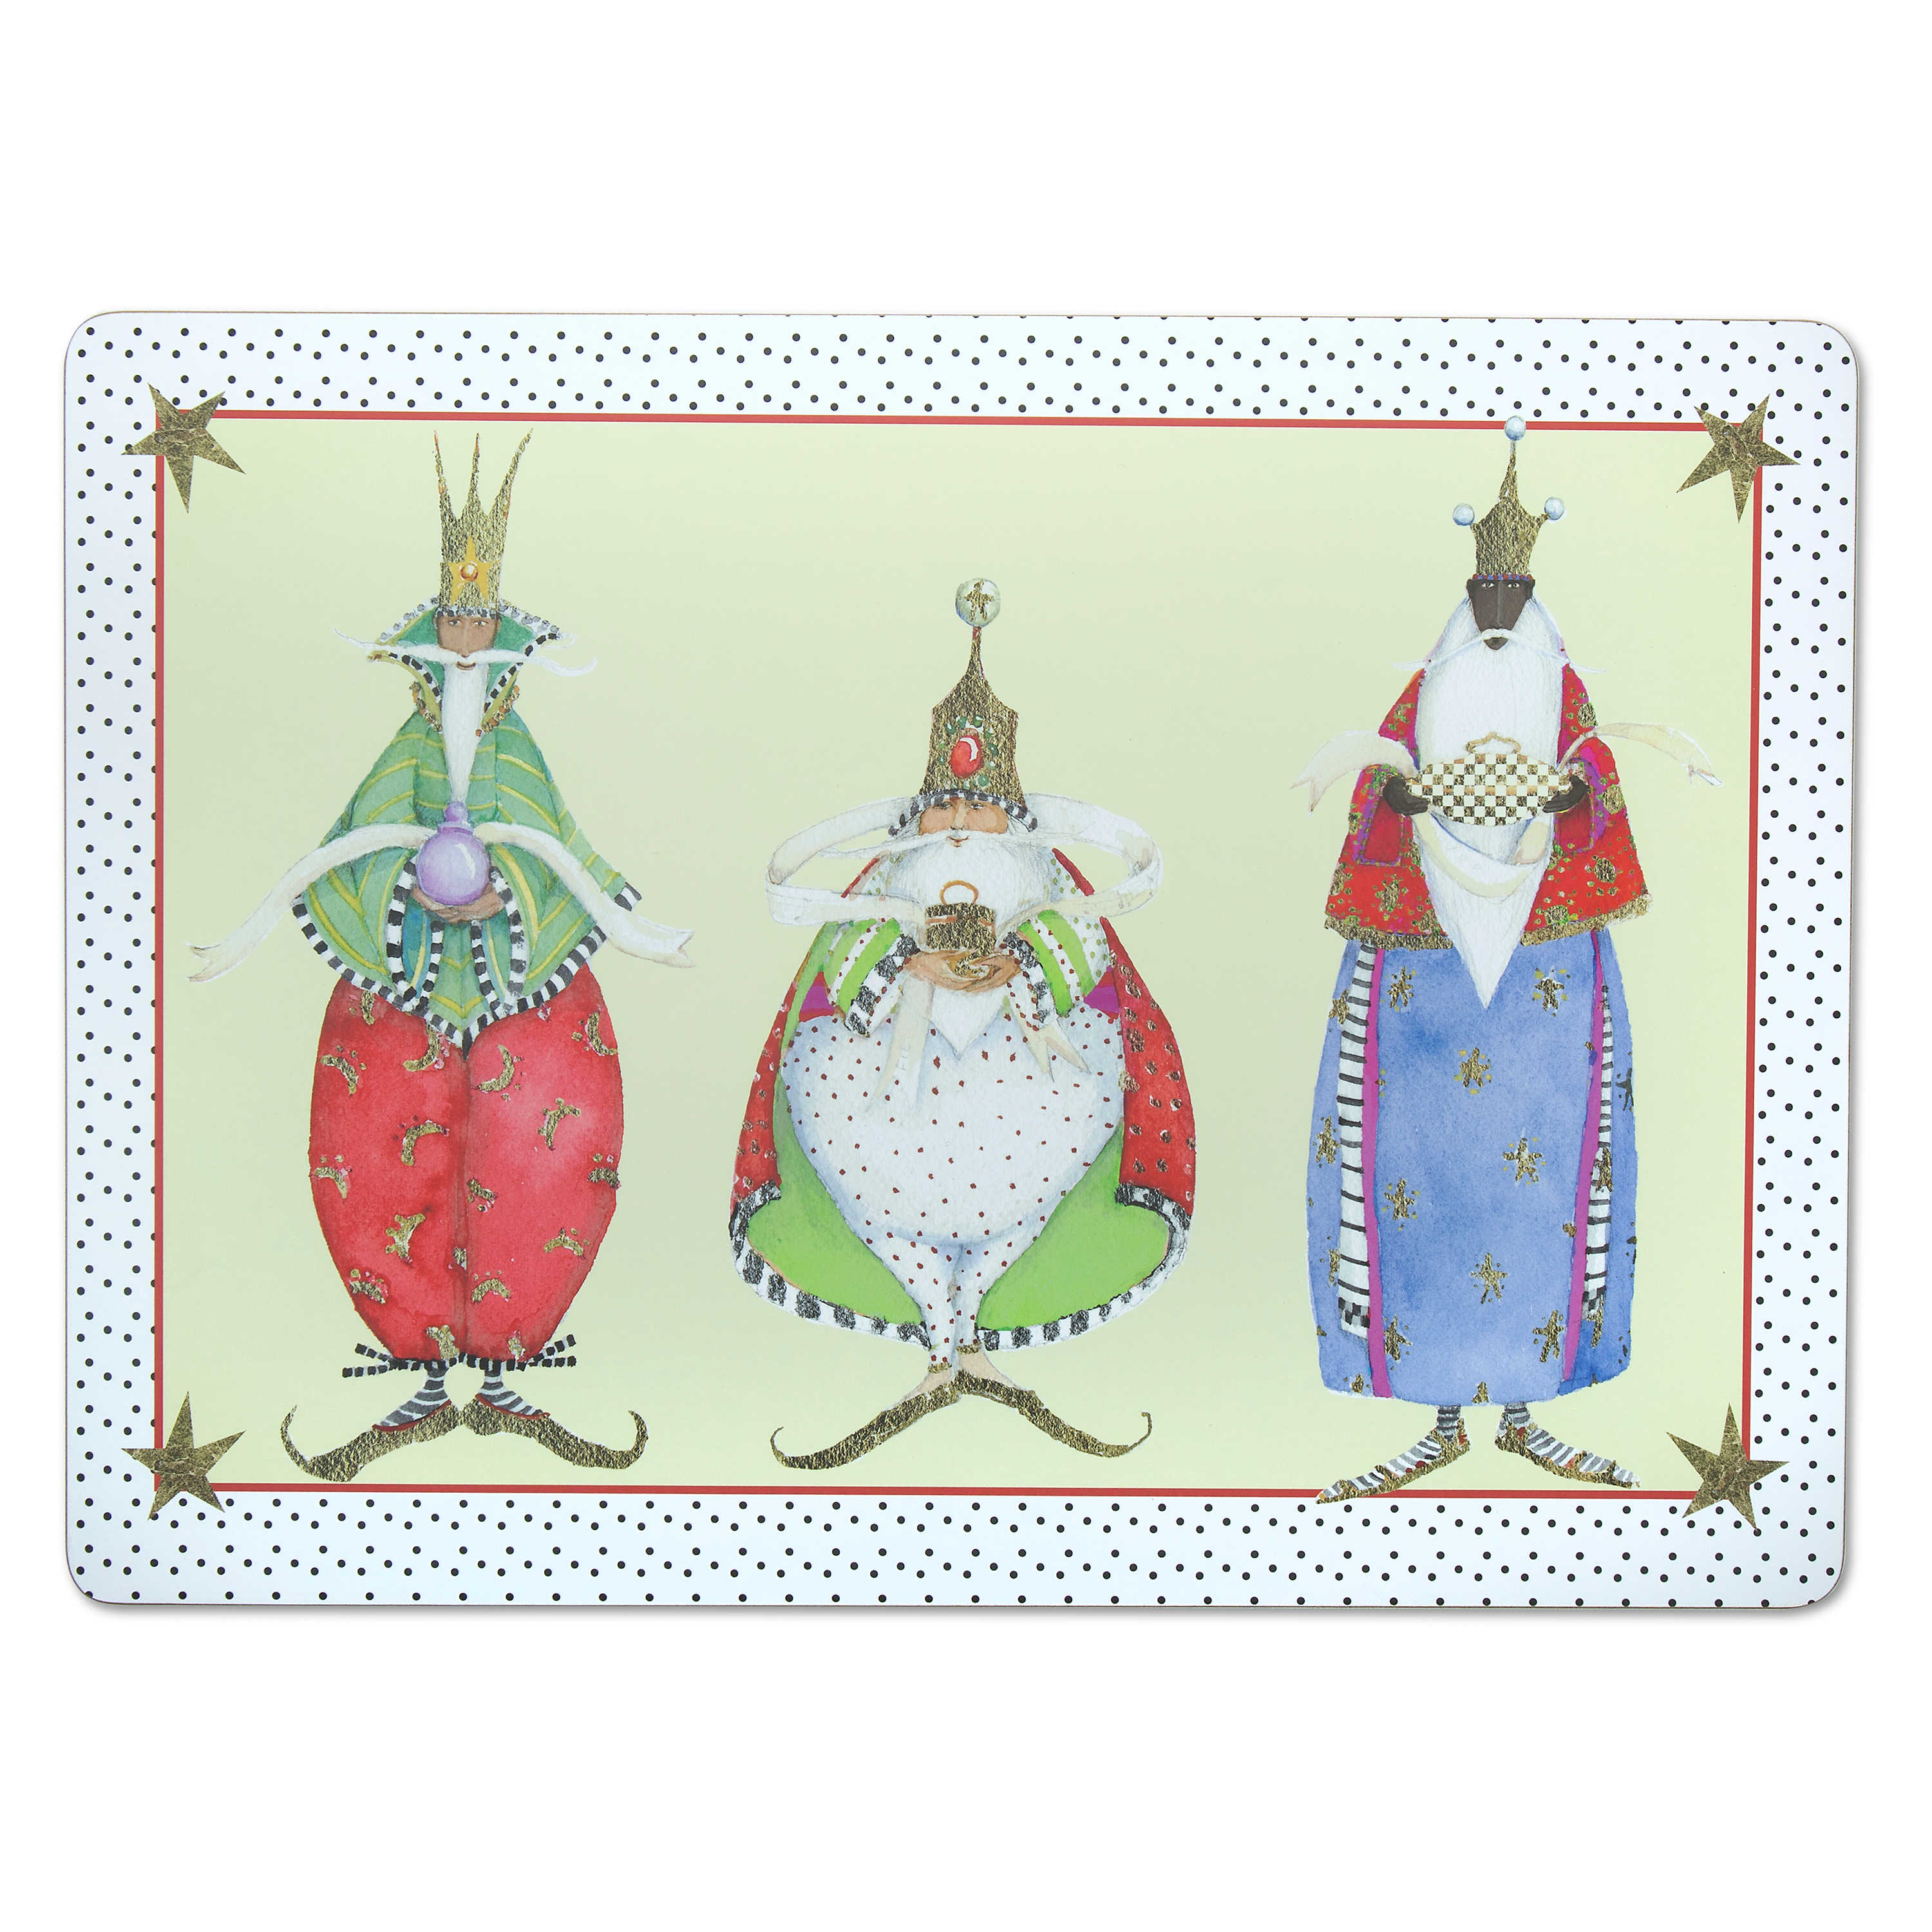 Patience Brewster Three Kings Cork Back Placemats - Set of 4 mackenzie-childs Panama 0